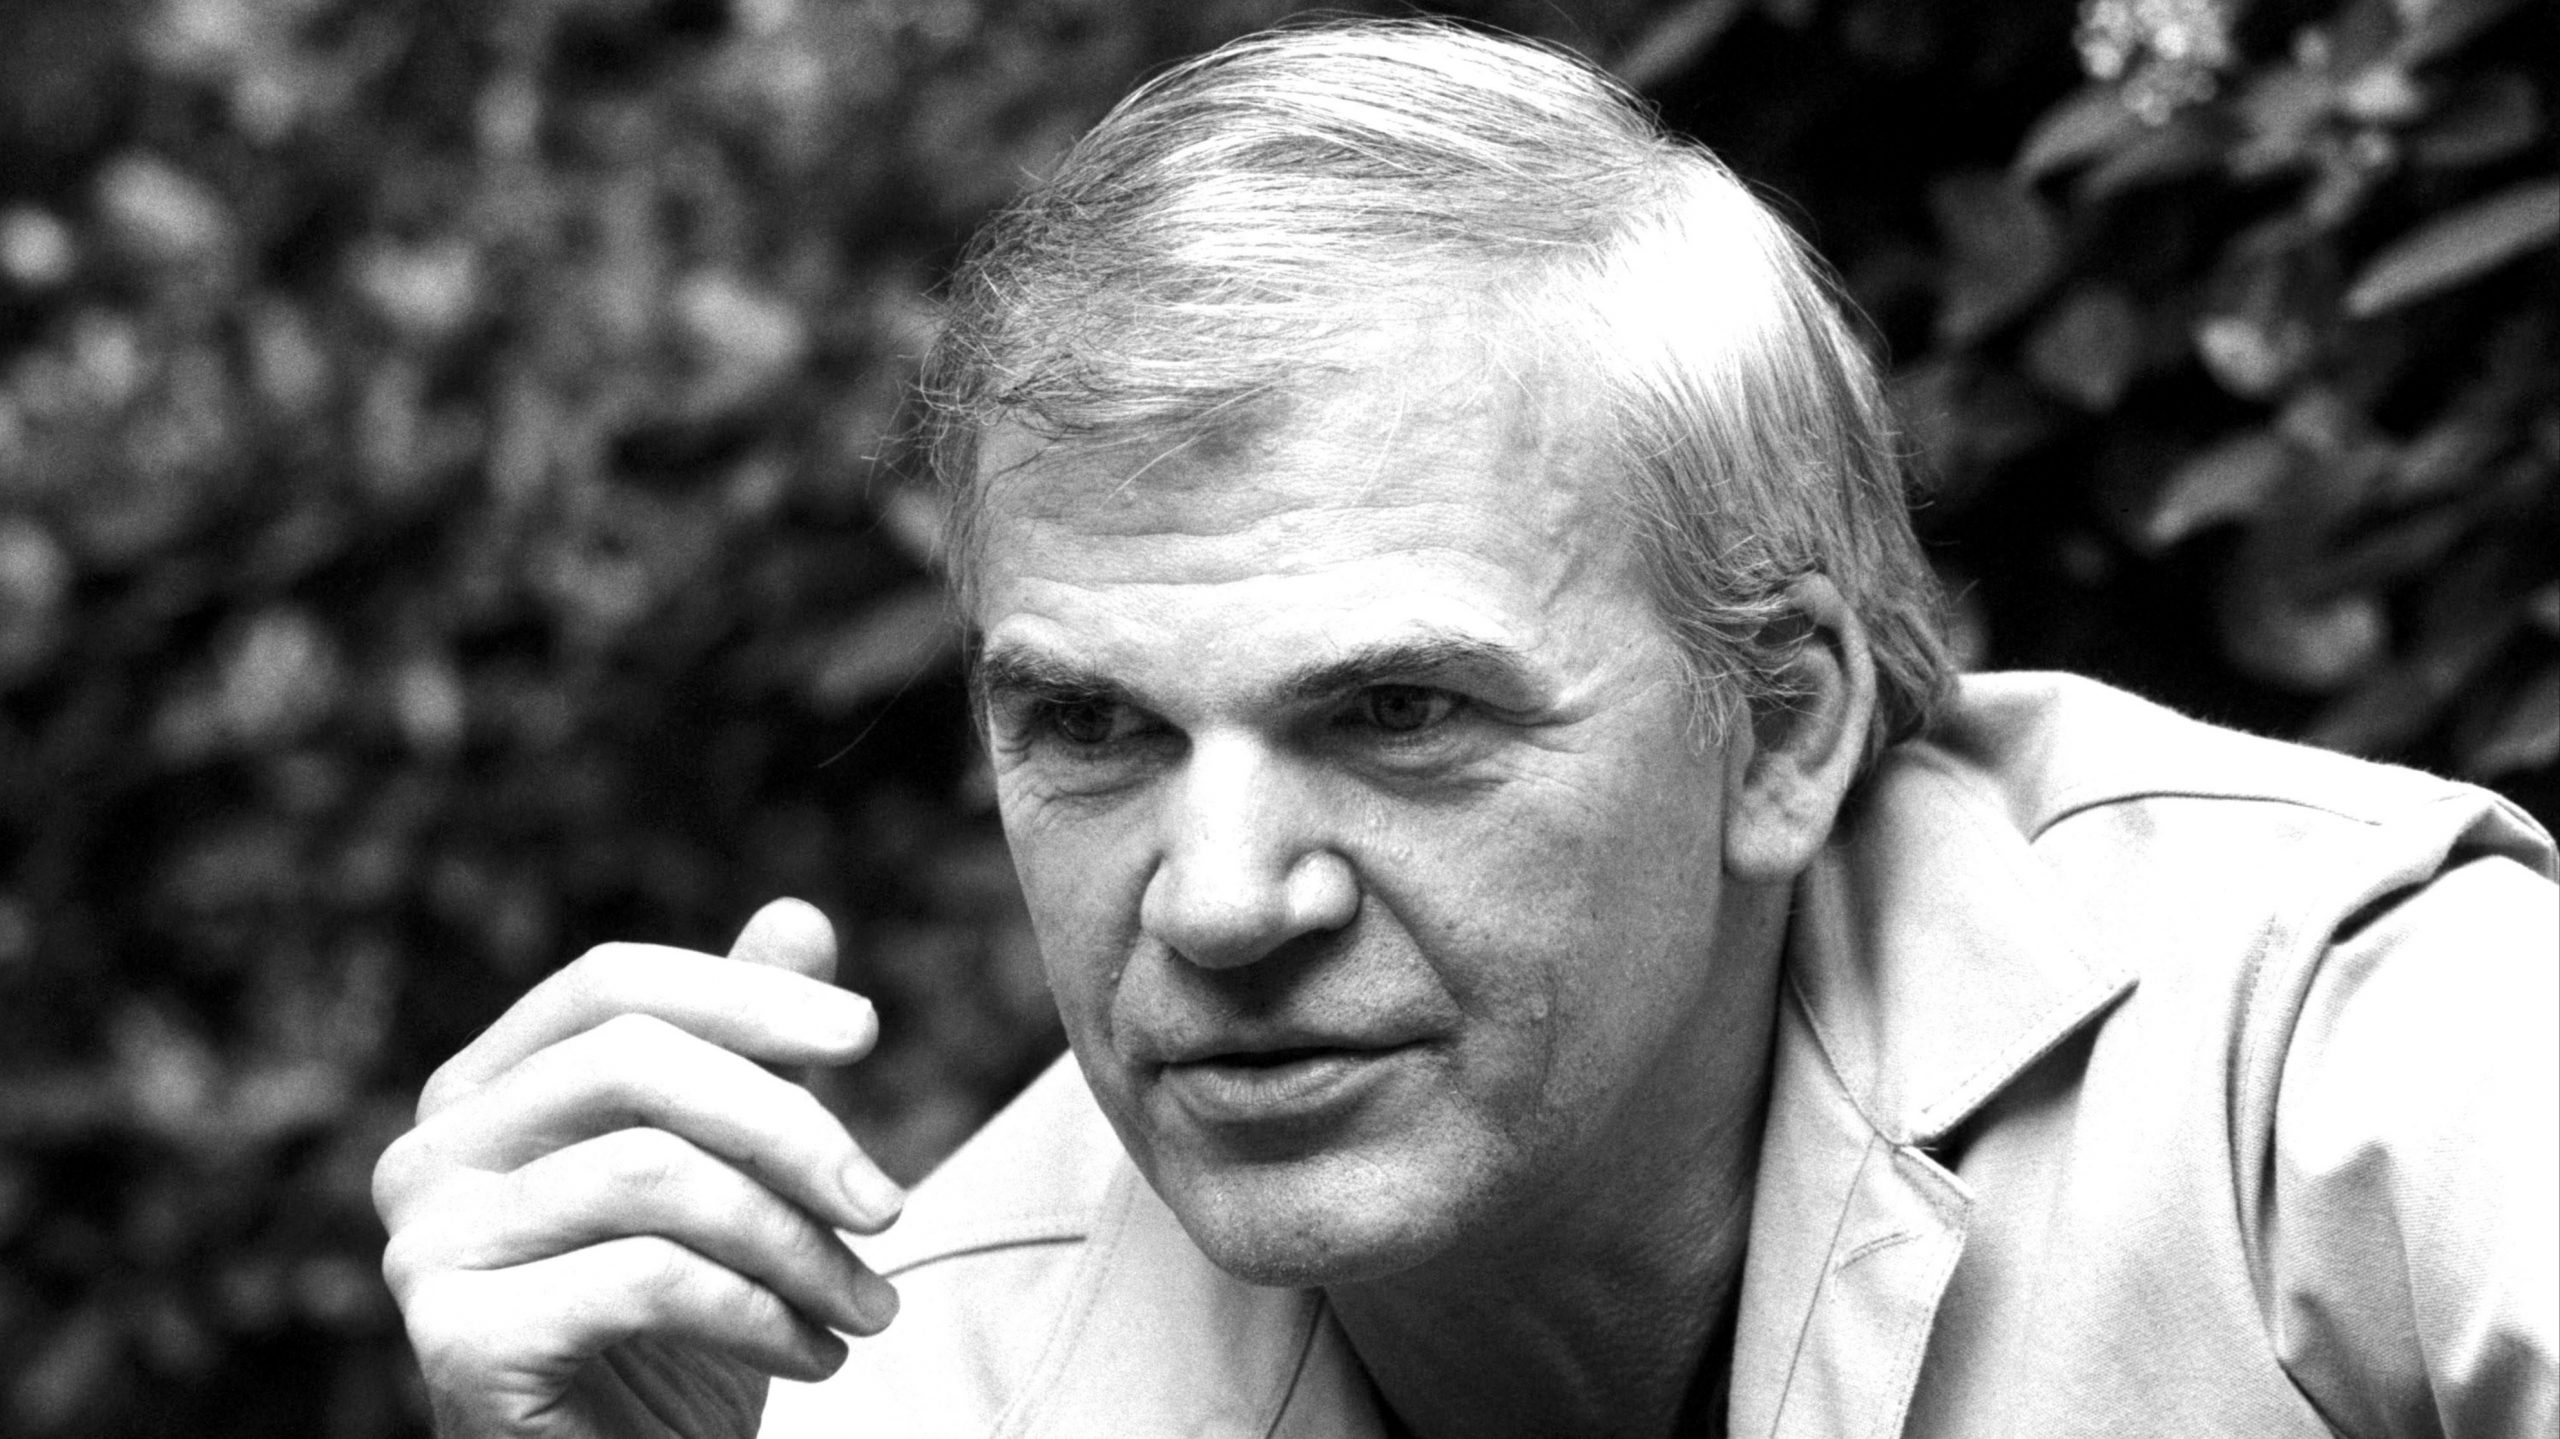 Who Was Milan Kundera? “The Unbearable Lightness of Being” Author dies at 94